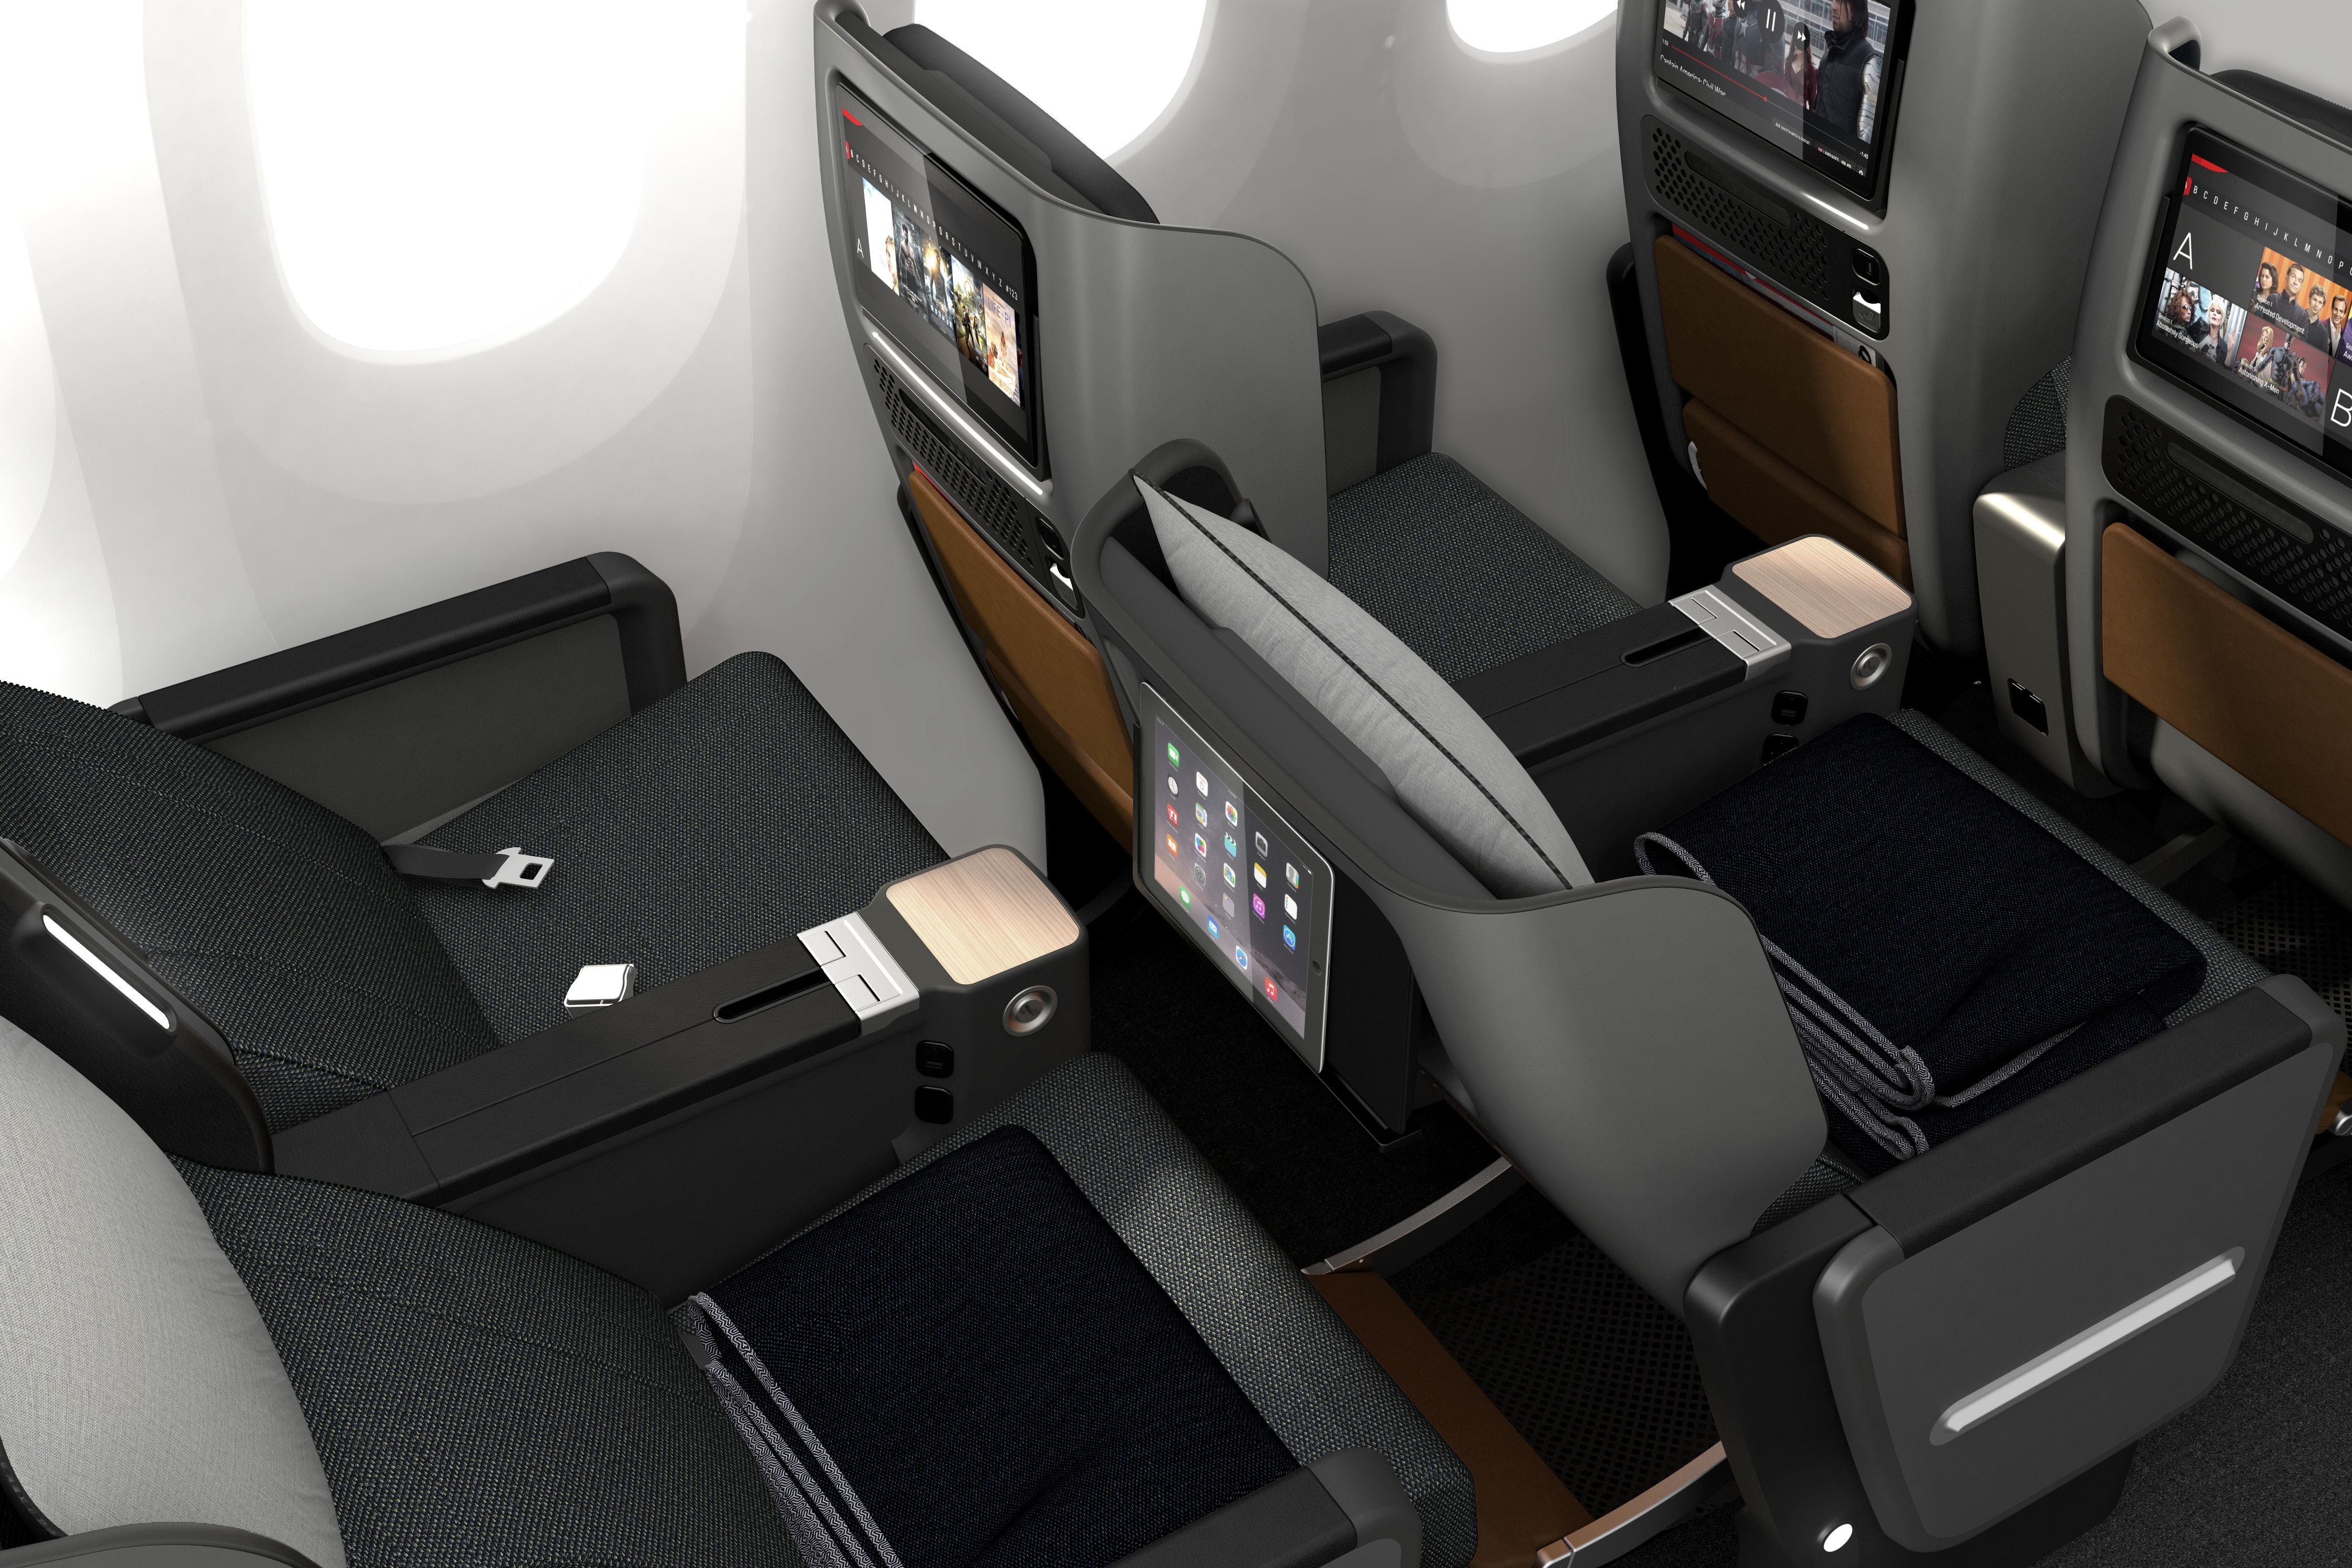 Black and grey airplane seats with entertainment screens built into back of the seats